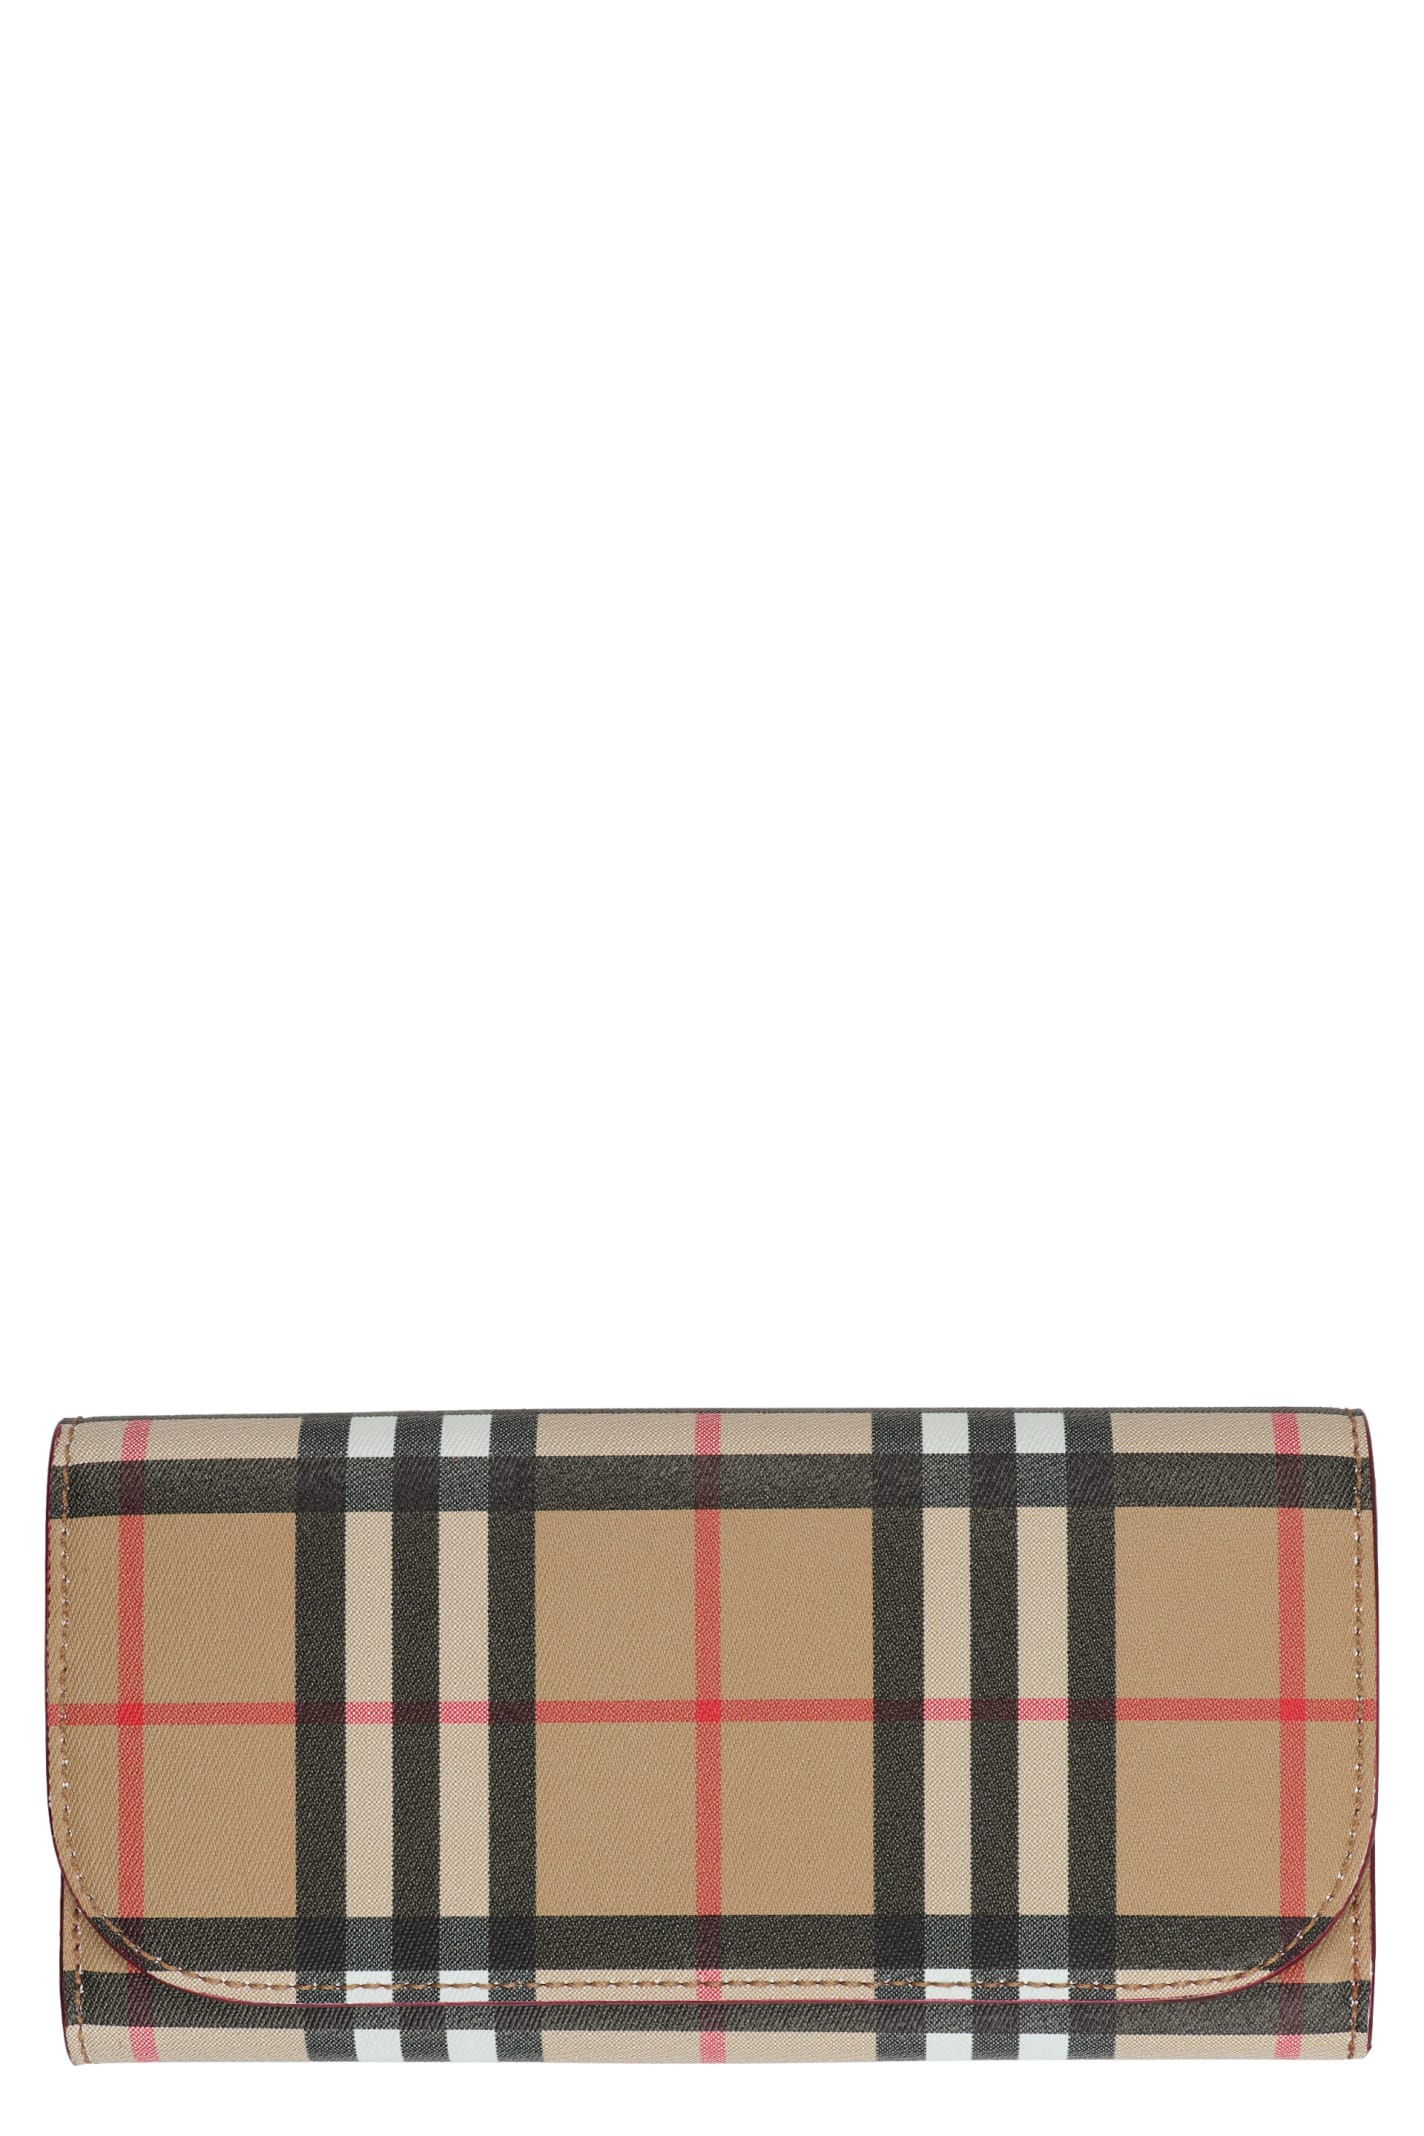 Burberry Printed Leather Wallet In Beige